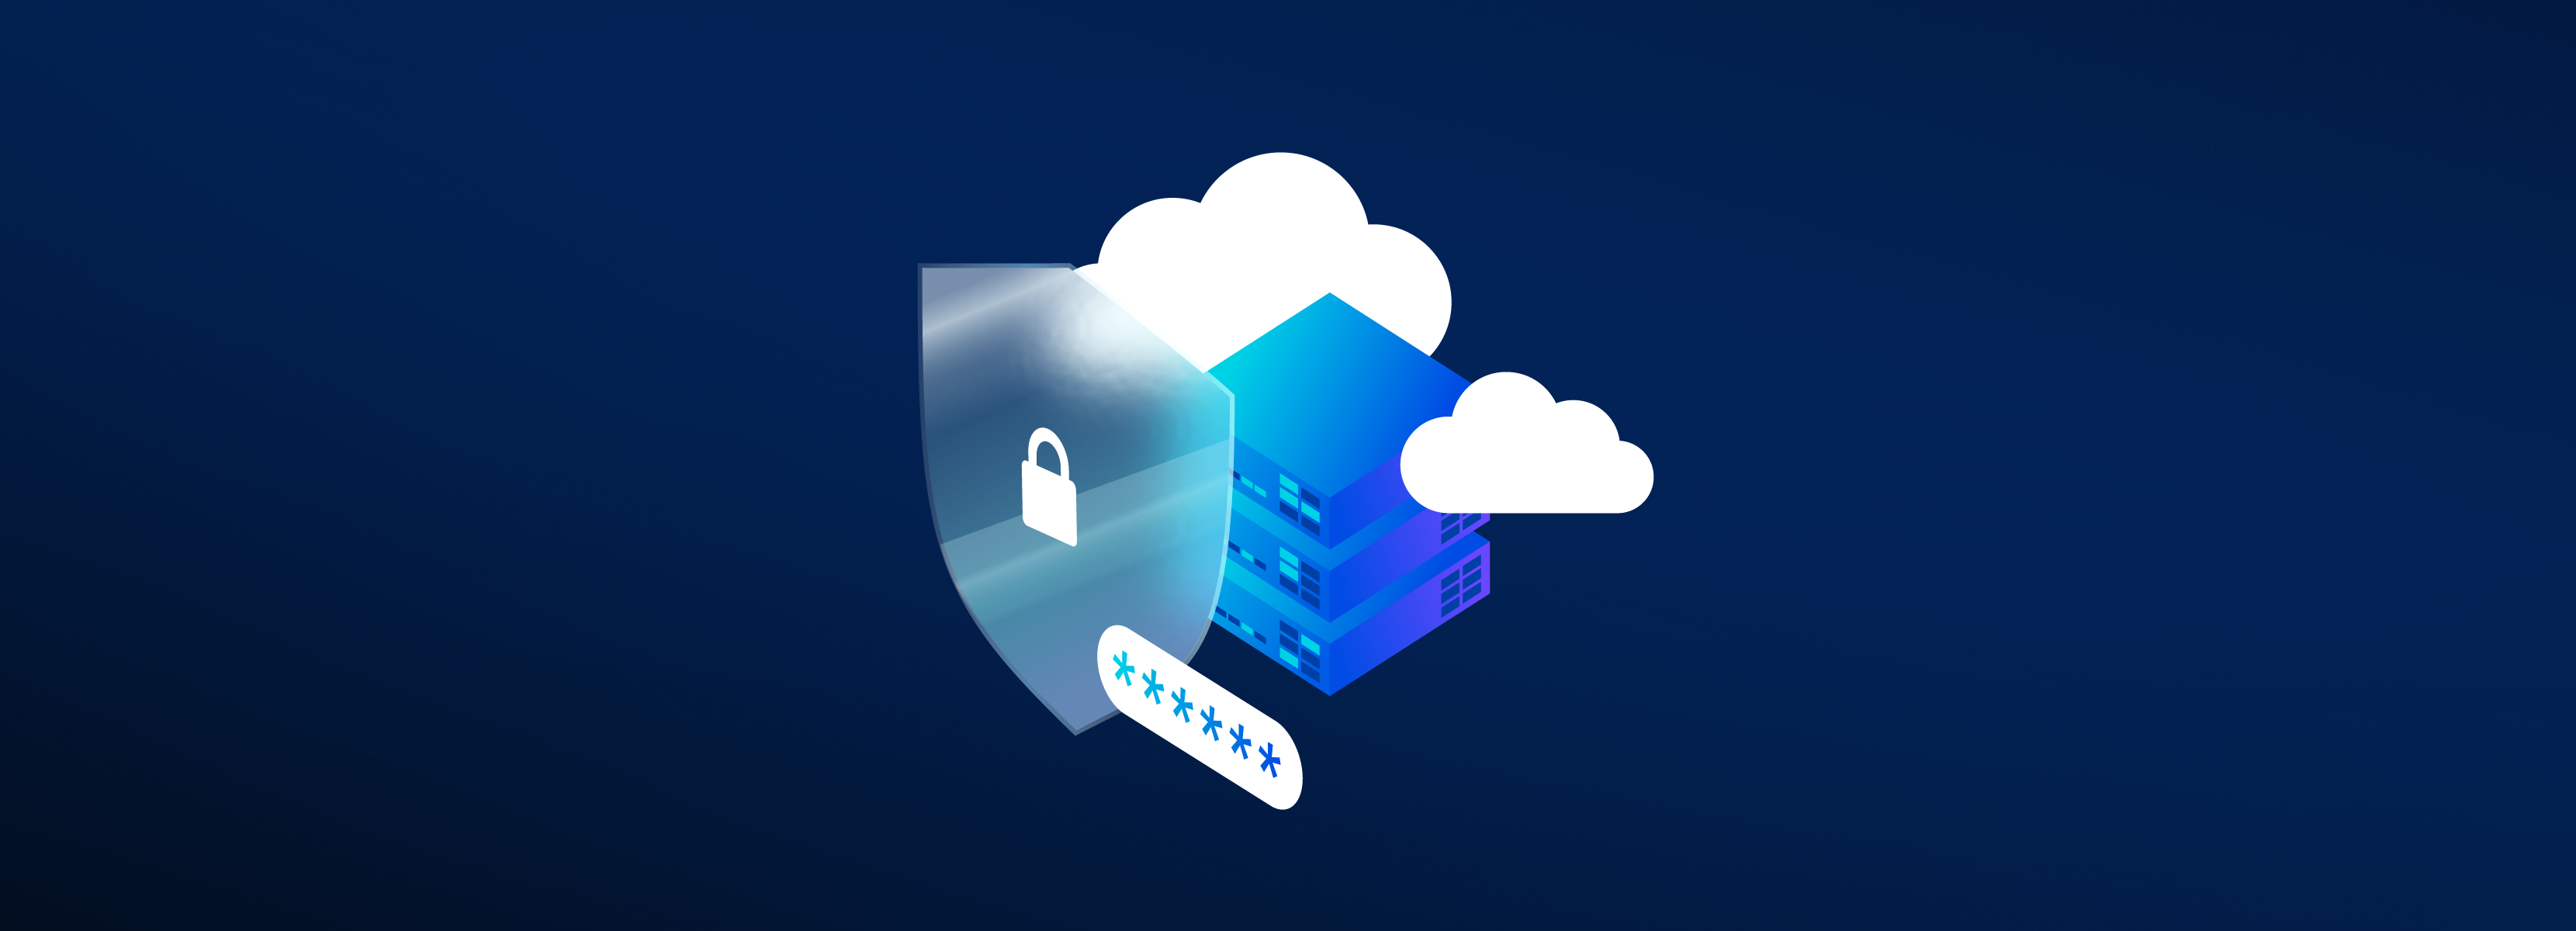 Why you need cloud storage with end-to-end encryption